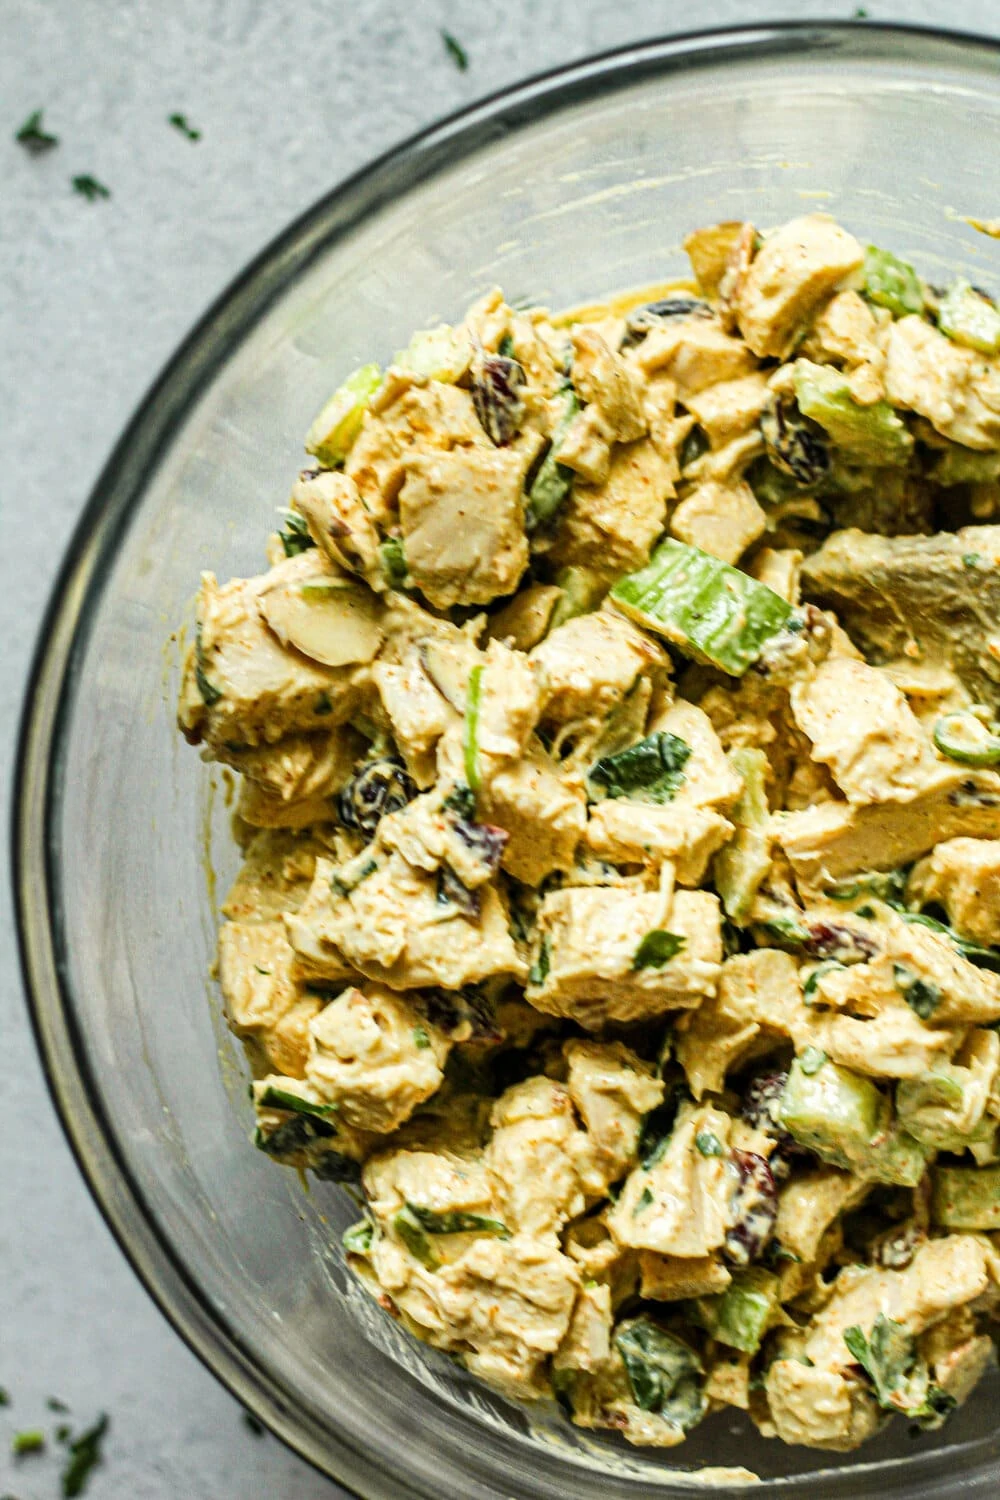 Curry Chicken Salad ingredients stirred together in glass mixing bowl